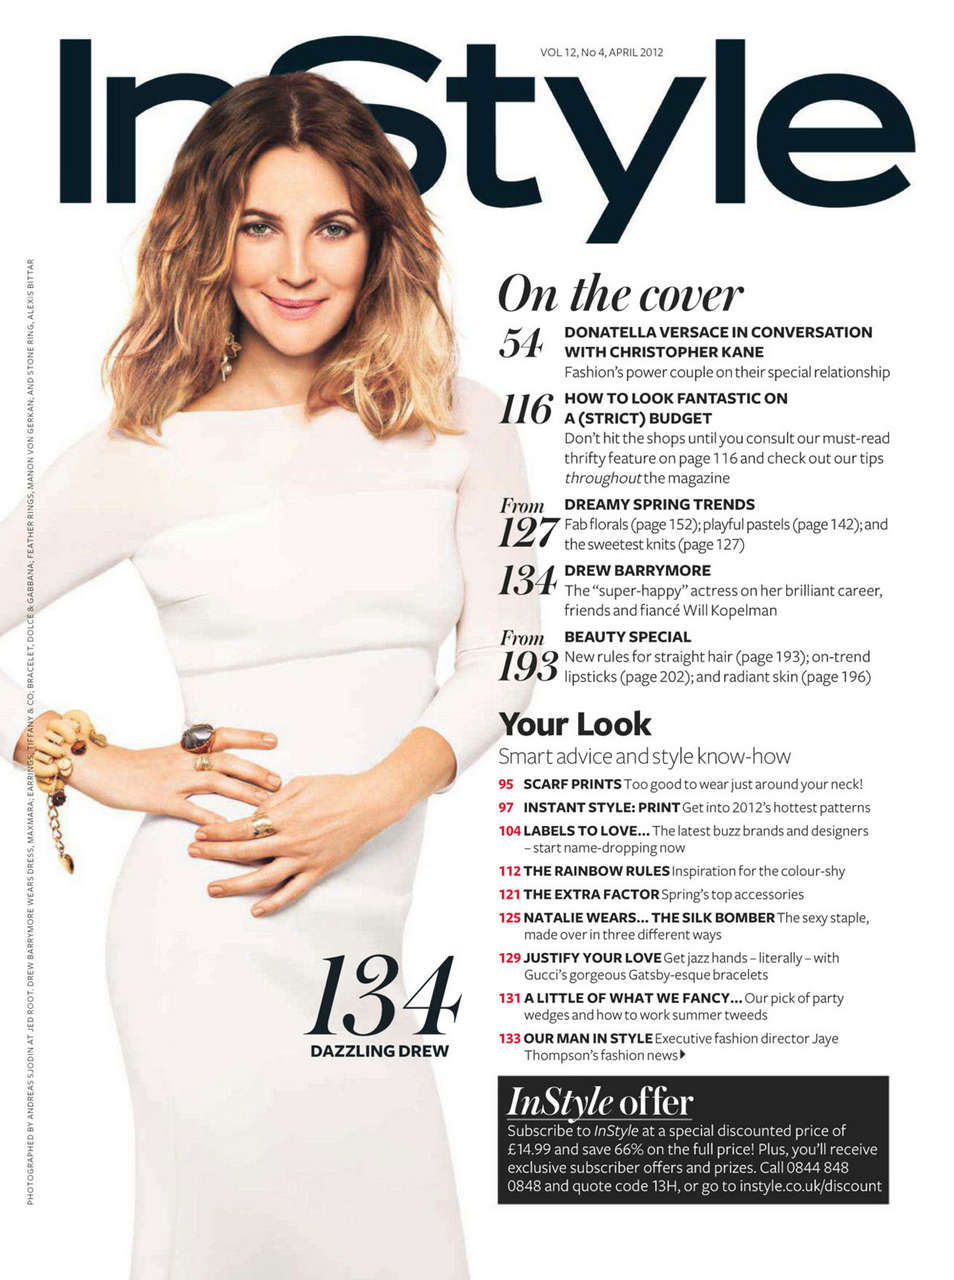 Drew Barrymore Instyle Magazine Uk 2012 April Issue